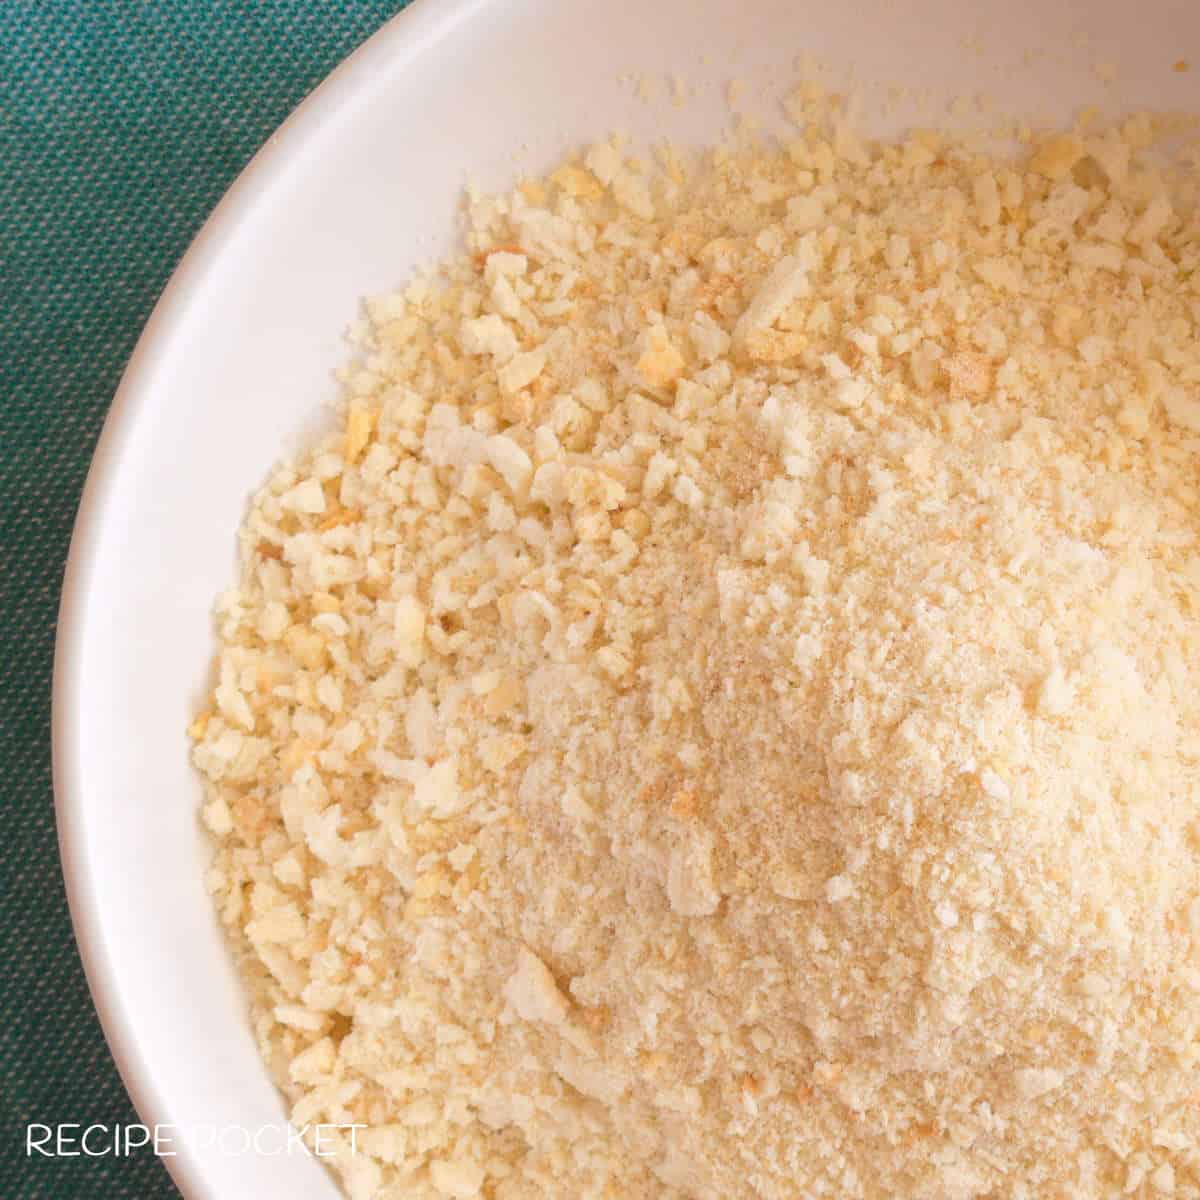 Close up of bread crumbs.